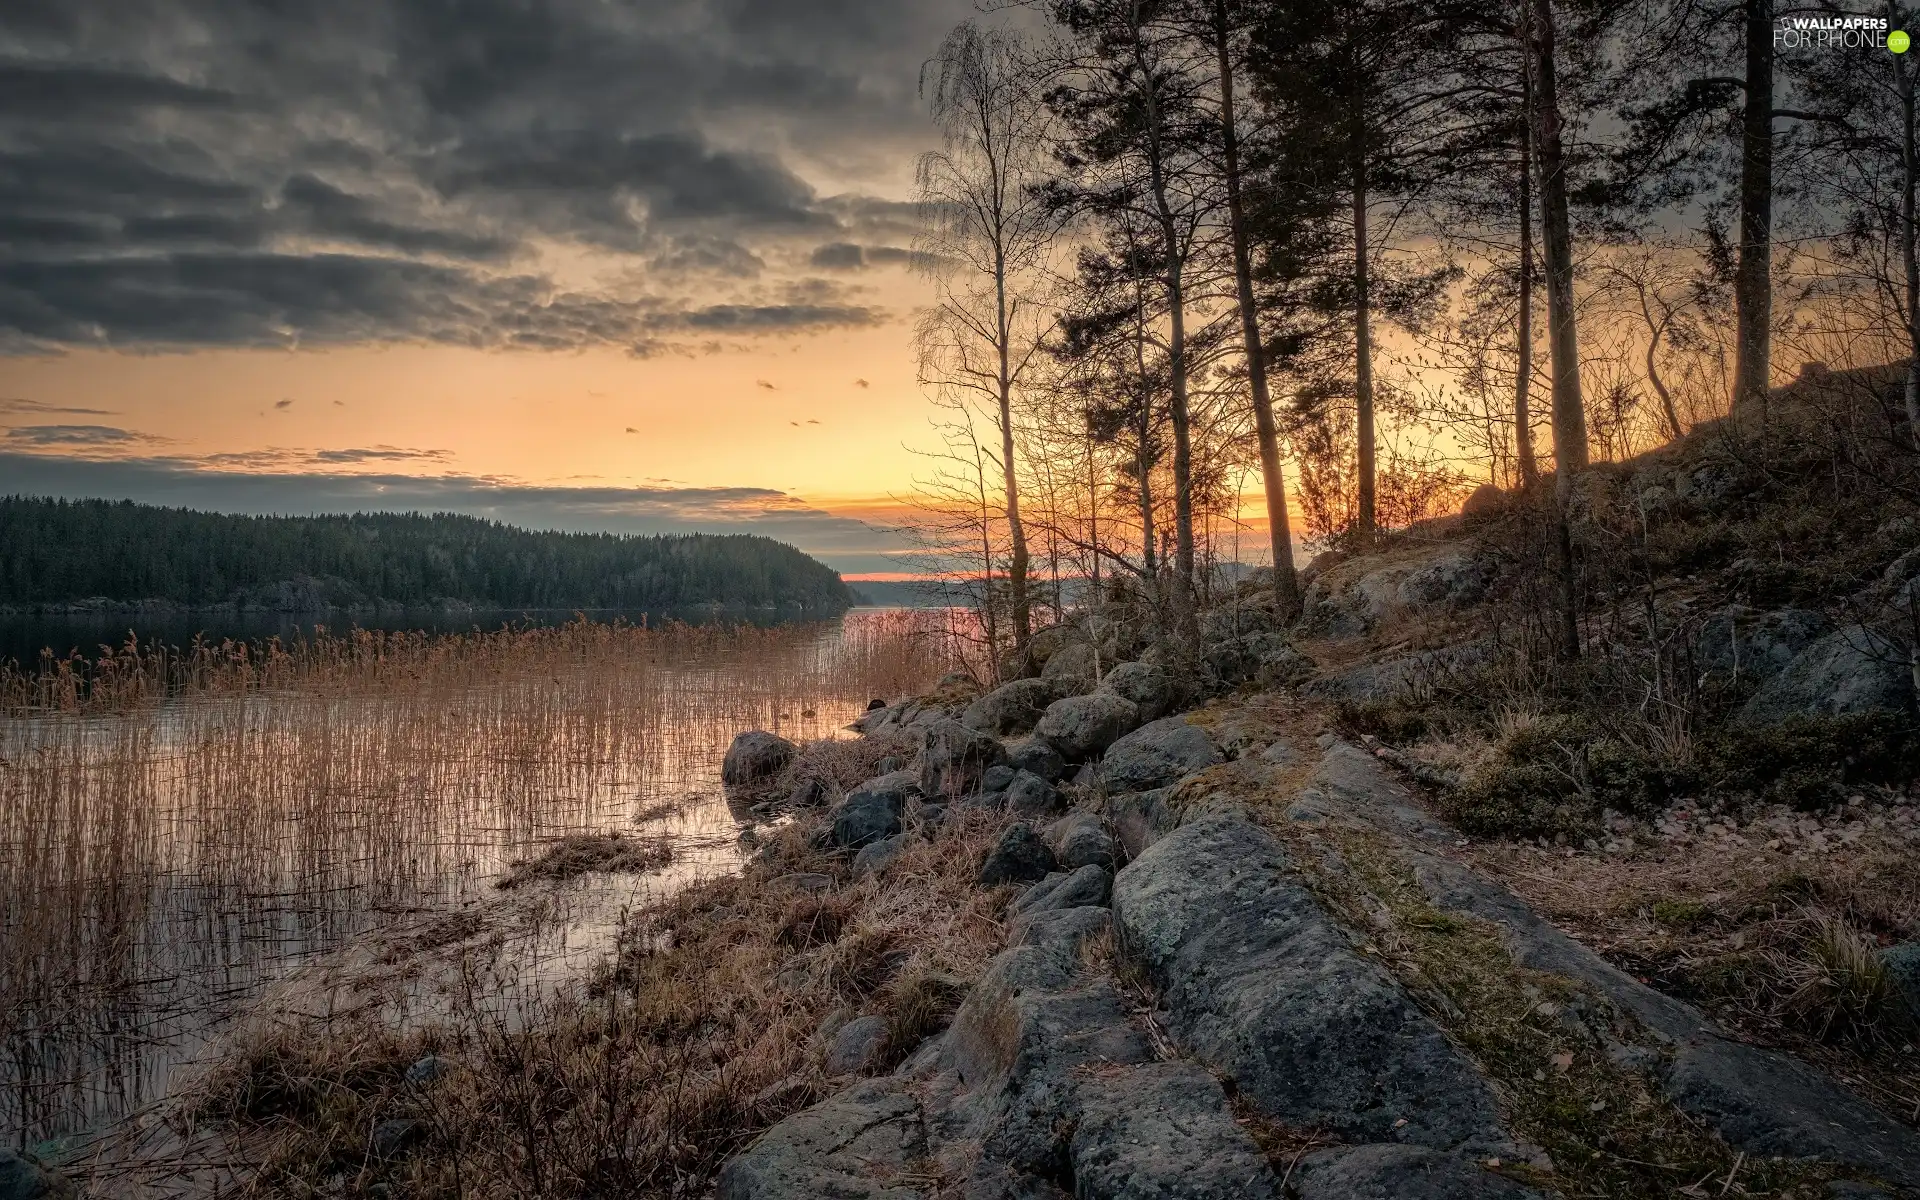 Lake Ladoga, Great Sunsets, rocks, trees, Karelia, Russia, clouds, rushes, viewes